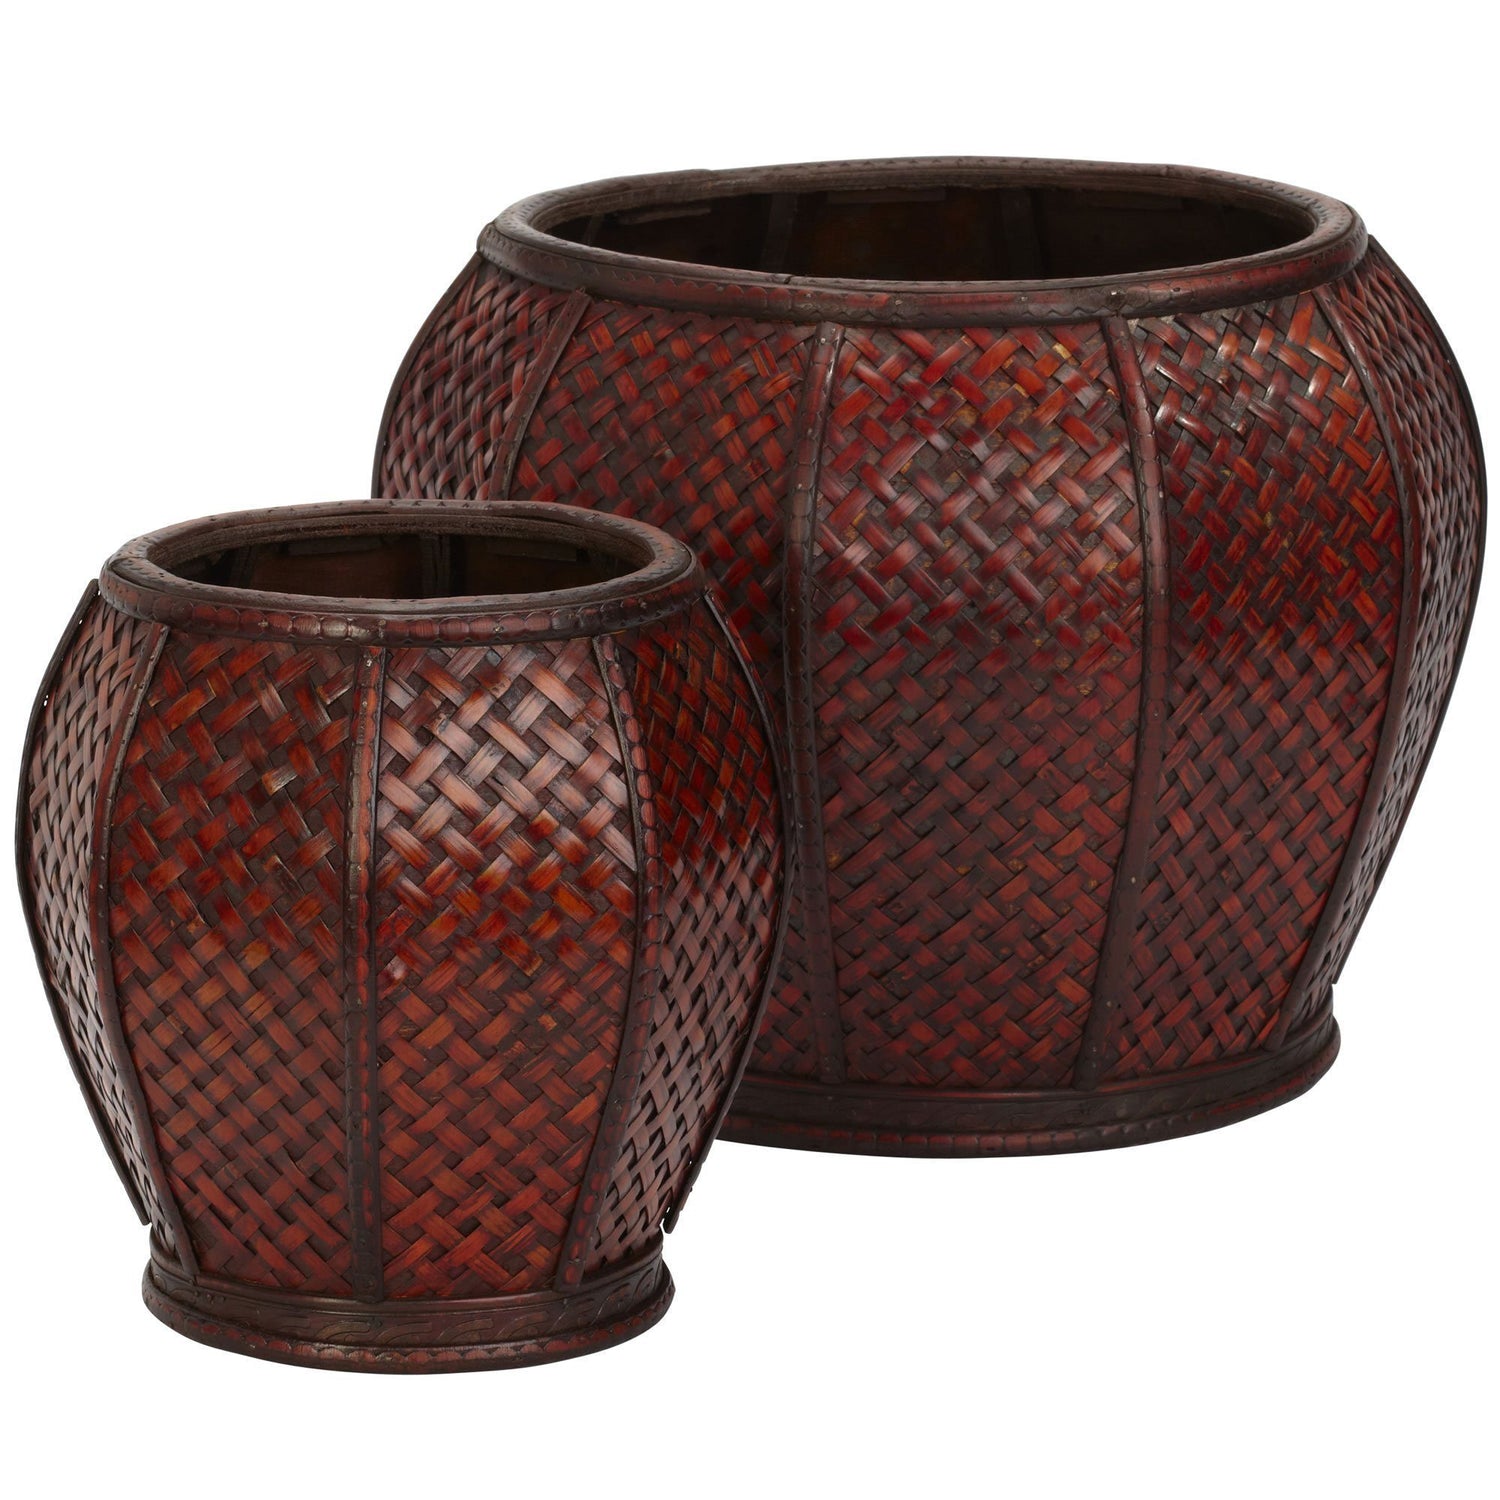 Rounded Weave Decorative Planters (Set of 2)